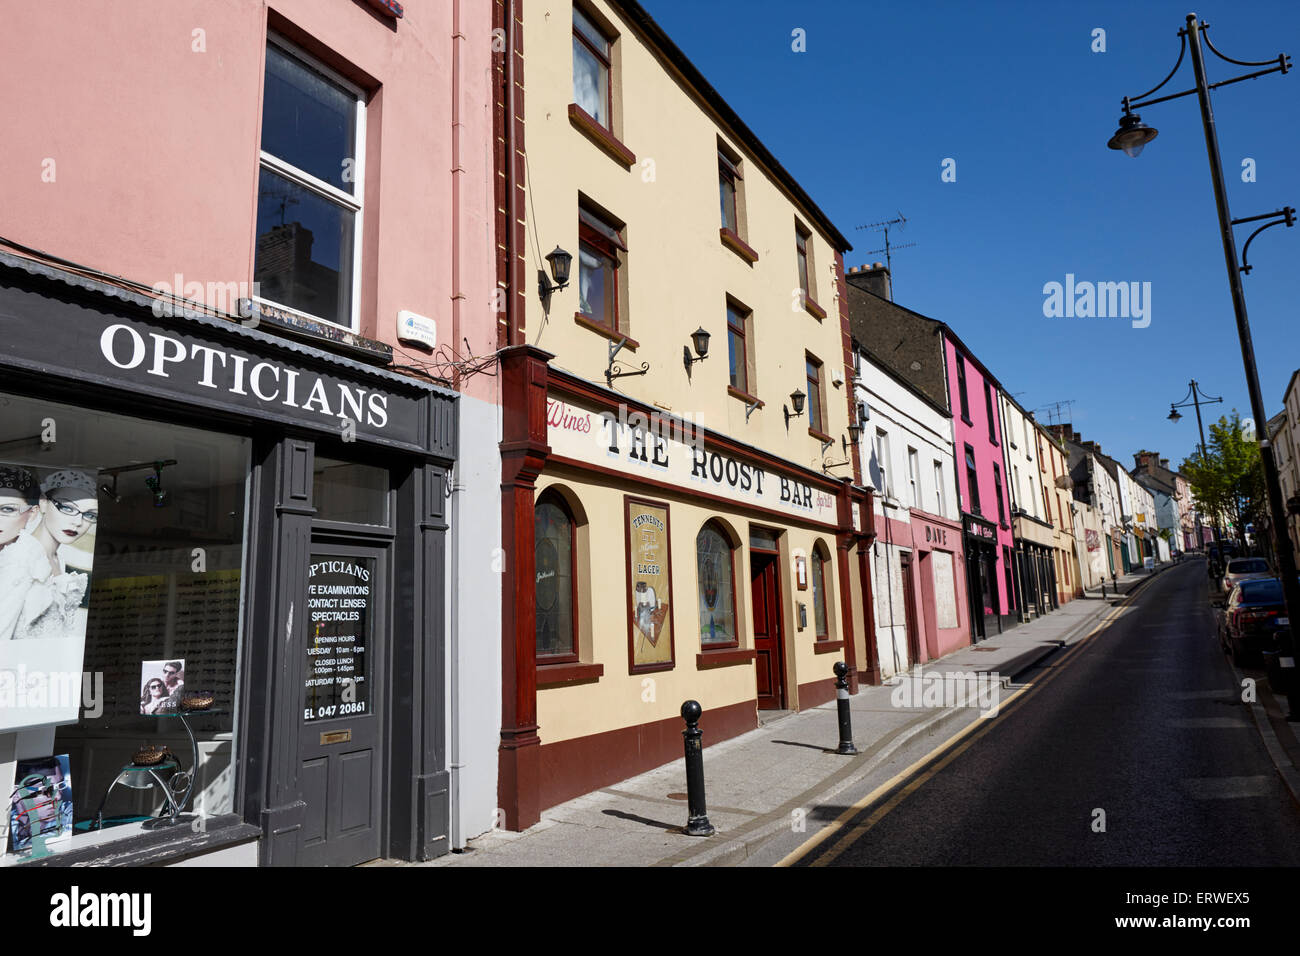 shops and the roost bar on steep fermanagh street Clones county monaghan republic of ireland Stock Photo